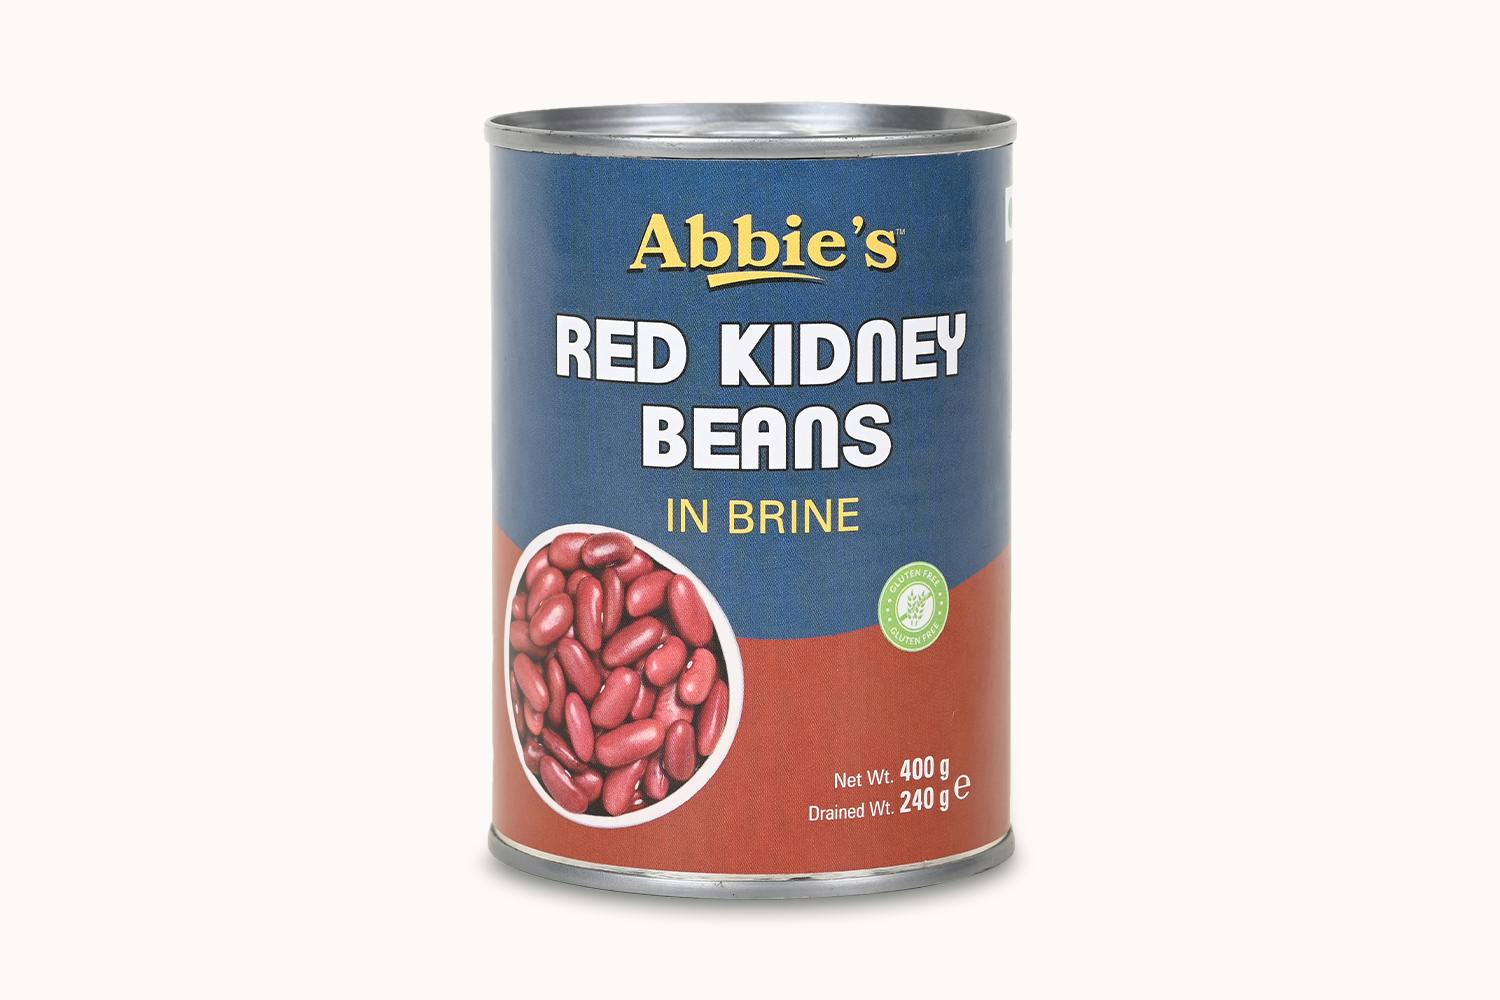 Abbie's Red Kidney Beans